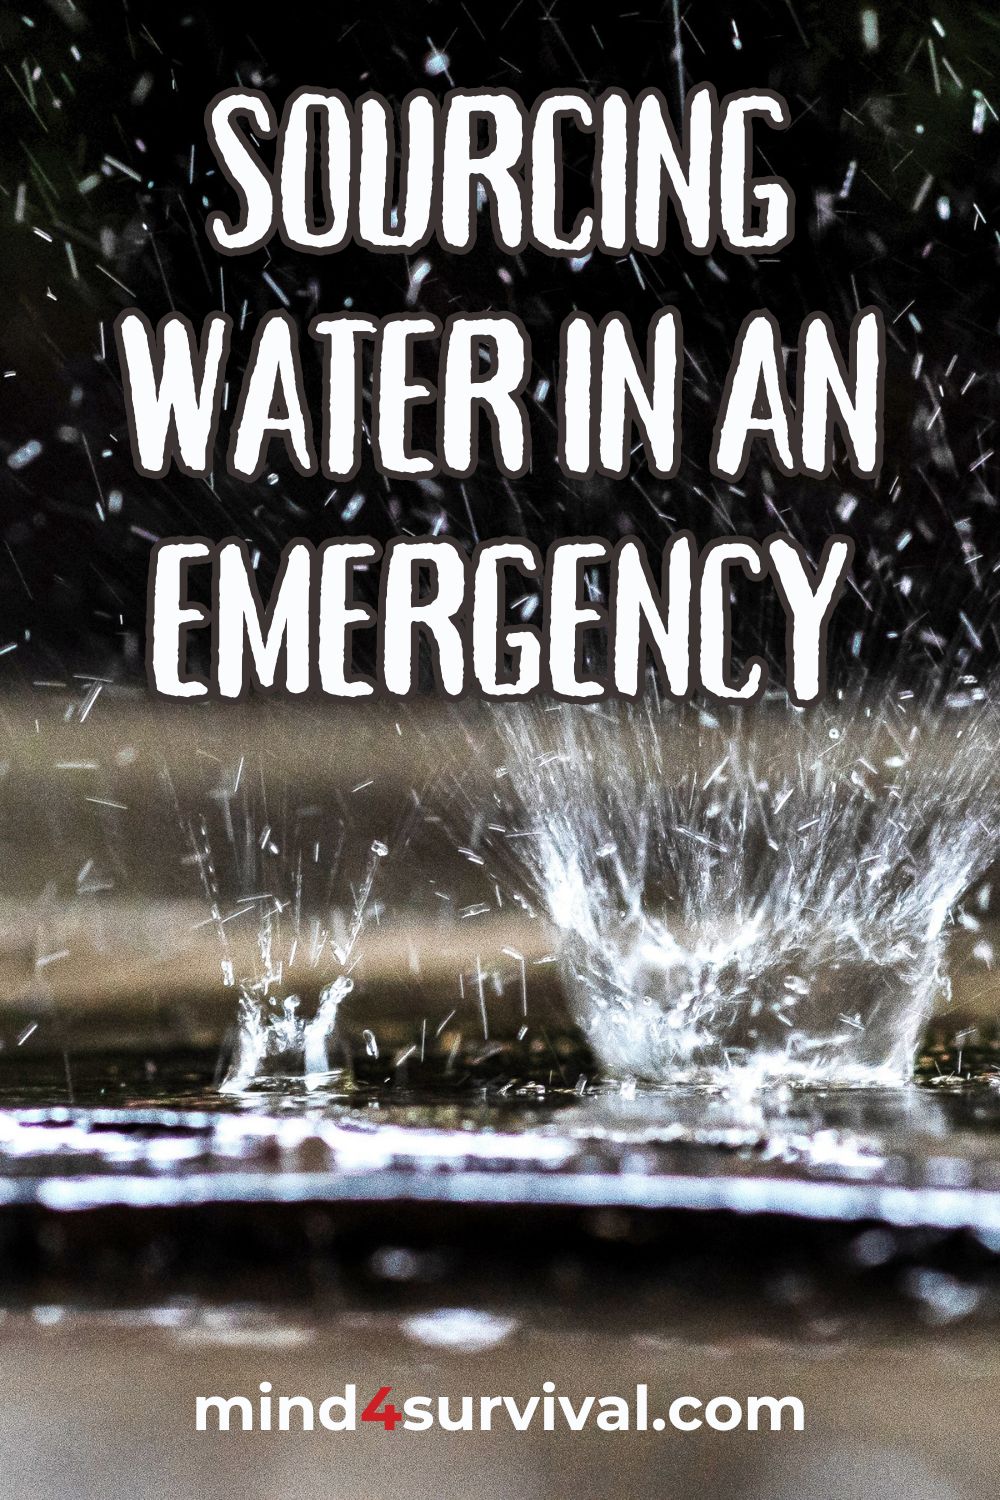 Sourcing Water in an Emergency